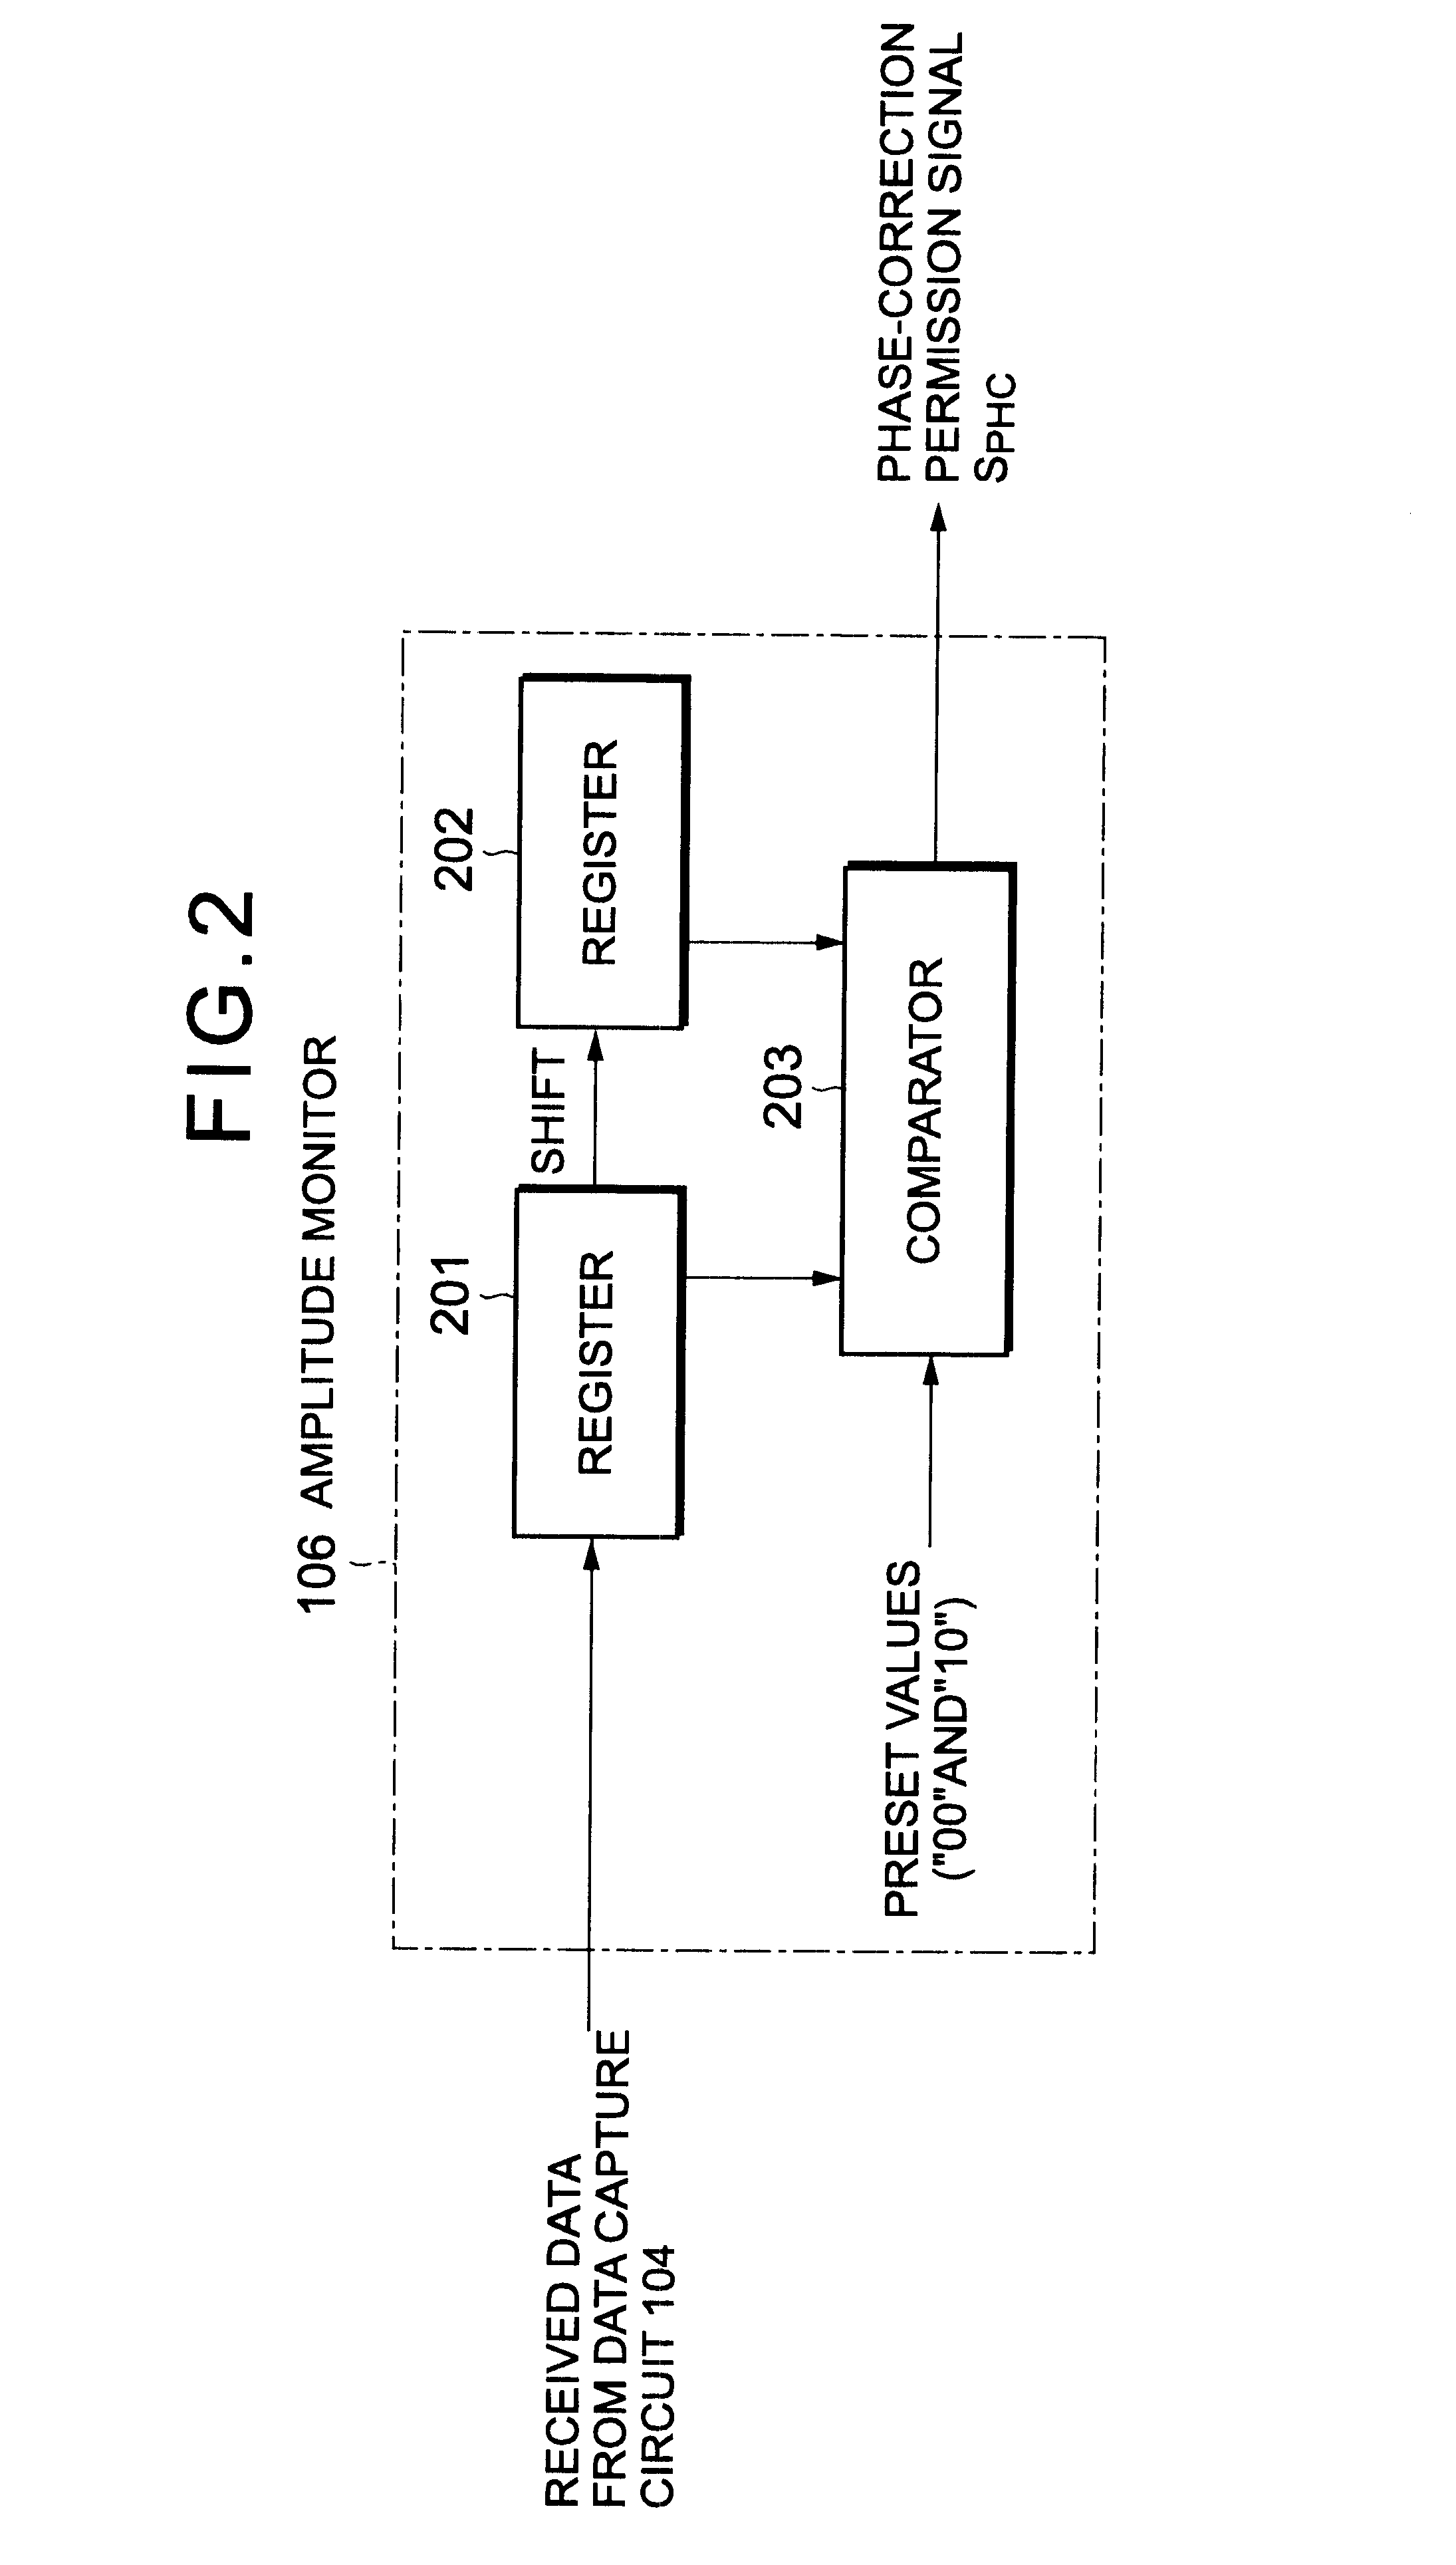 Amplitude change time activated phase locked controller in a selective call receiver